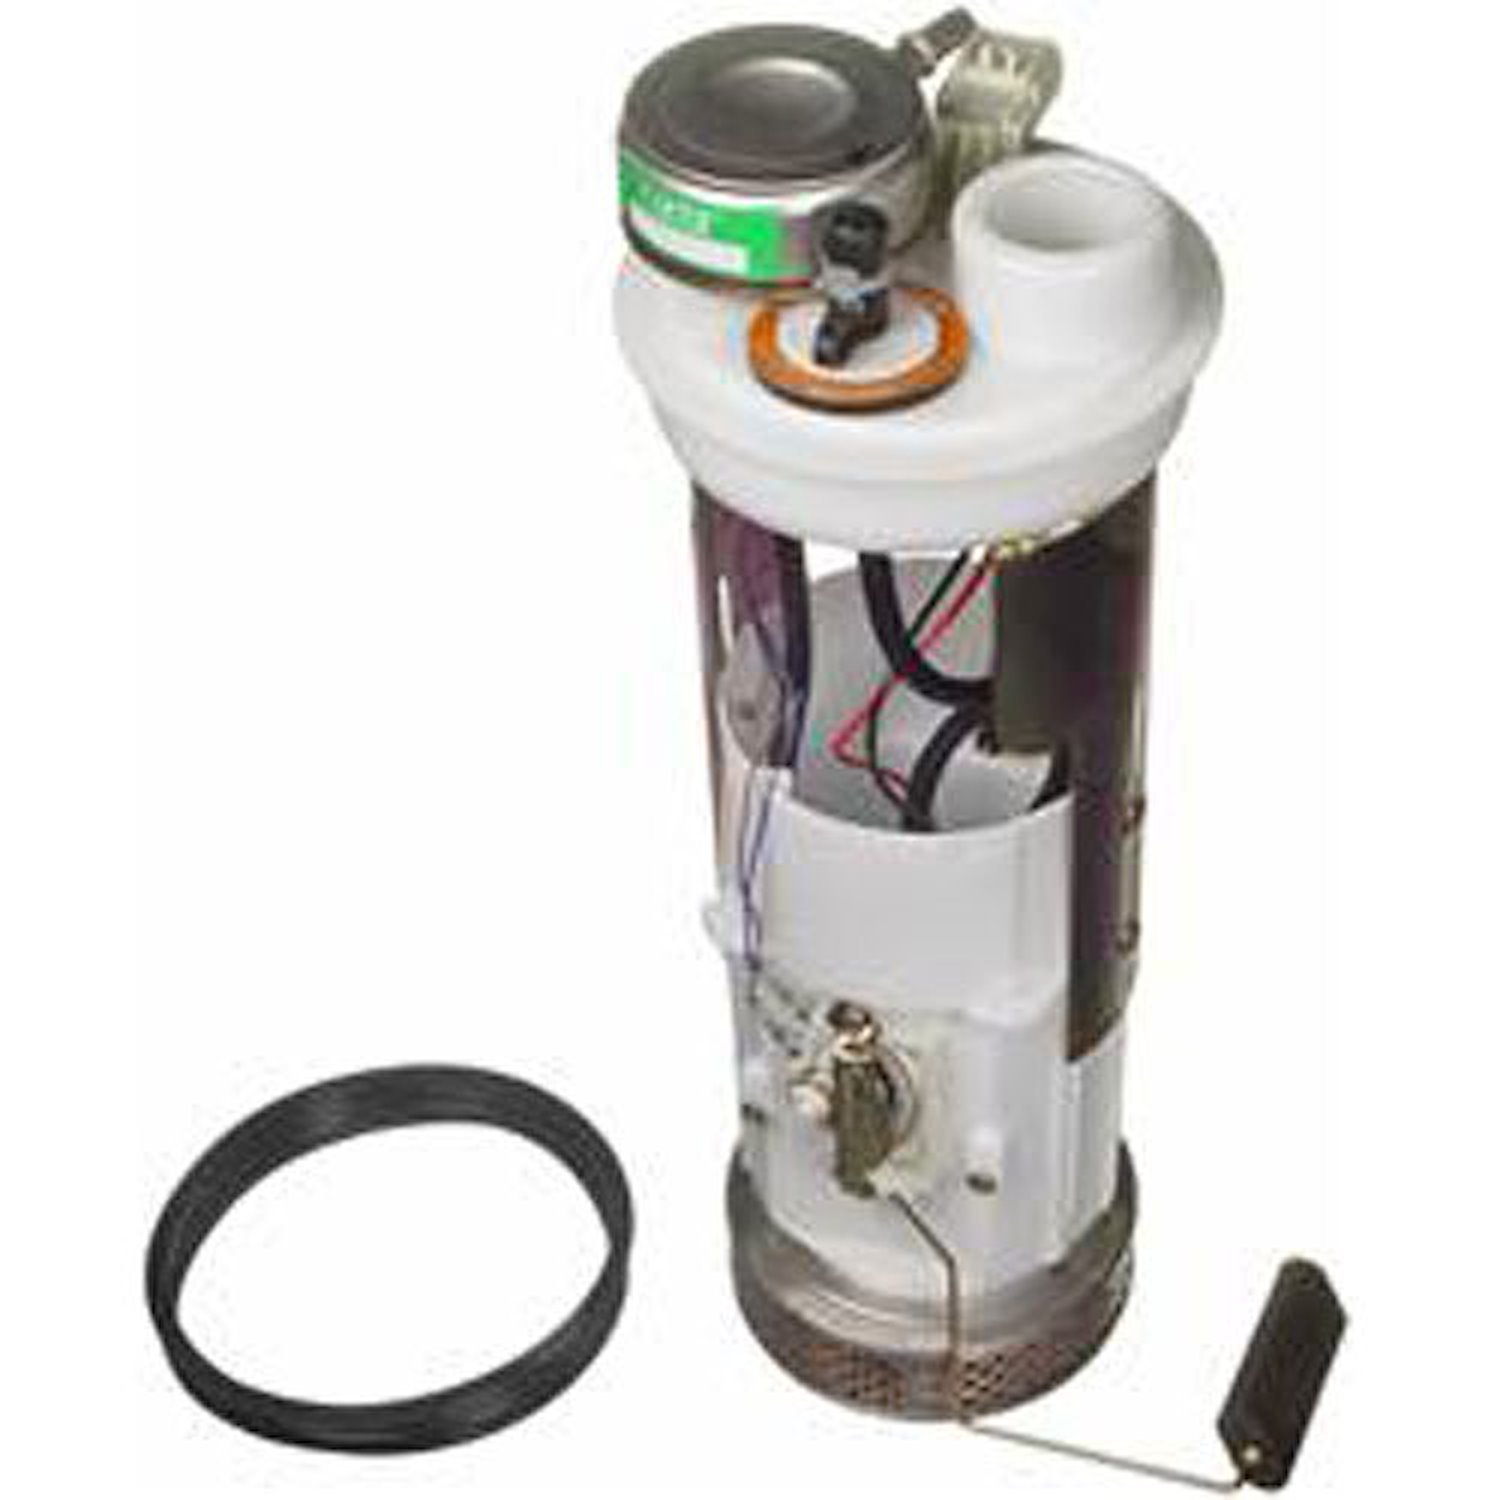 OE Chrysler/Dodge Replacement Electric Fuel Pump Module Assembly for 1996-1997 Dodge Ram 1500/2500/3500